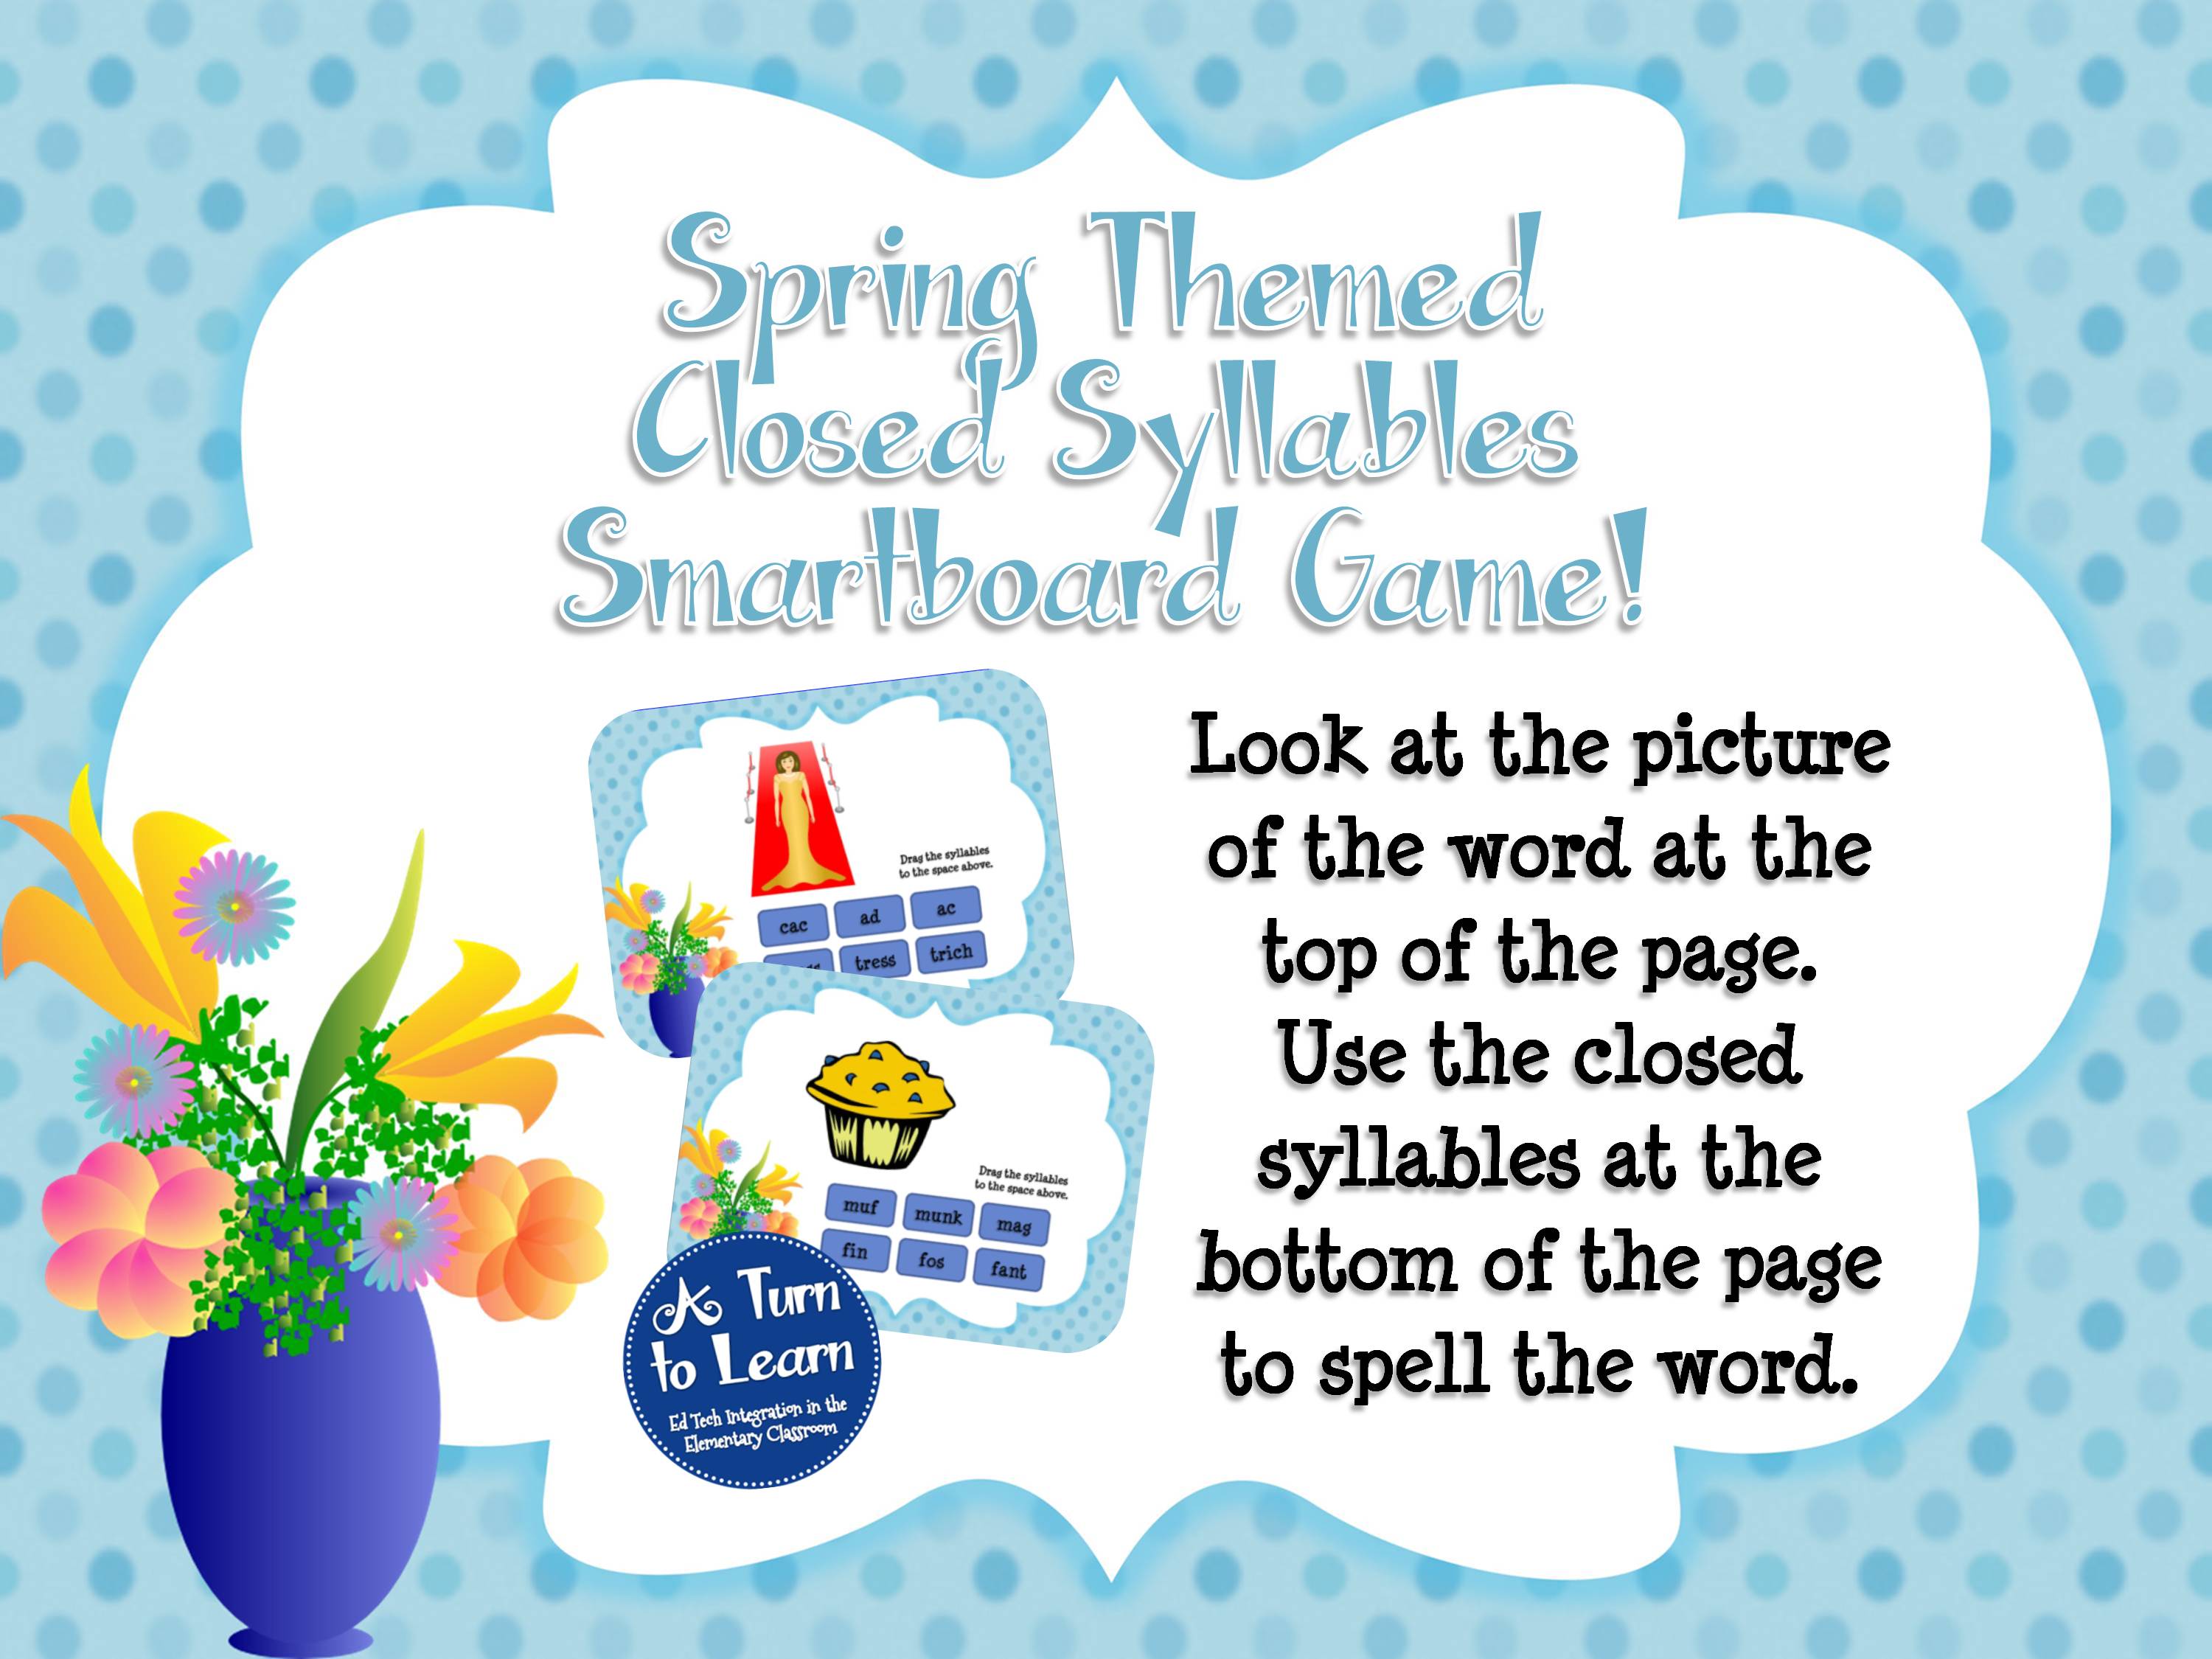 Spring Themed Closed Syllables Smartboard Game... Teach nonsense CVC words with a purpose!